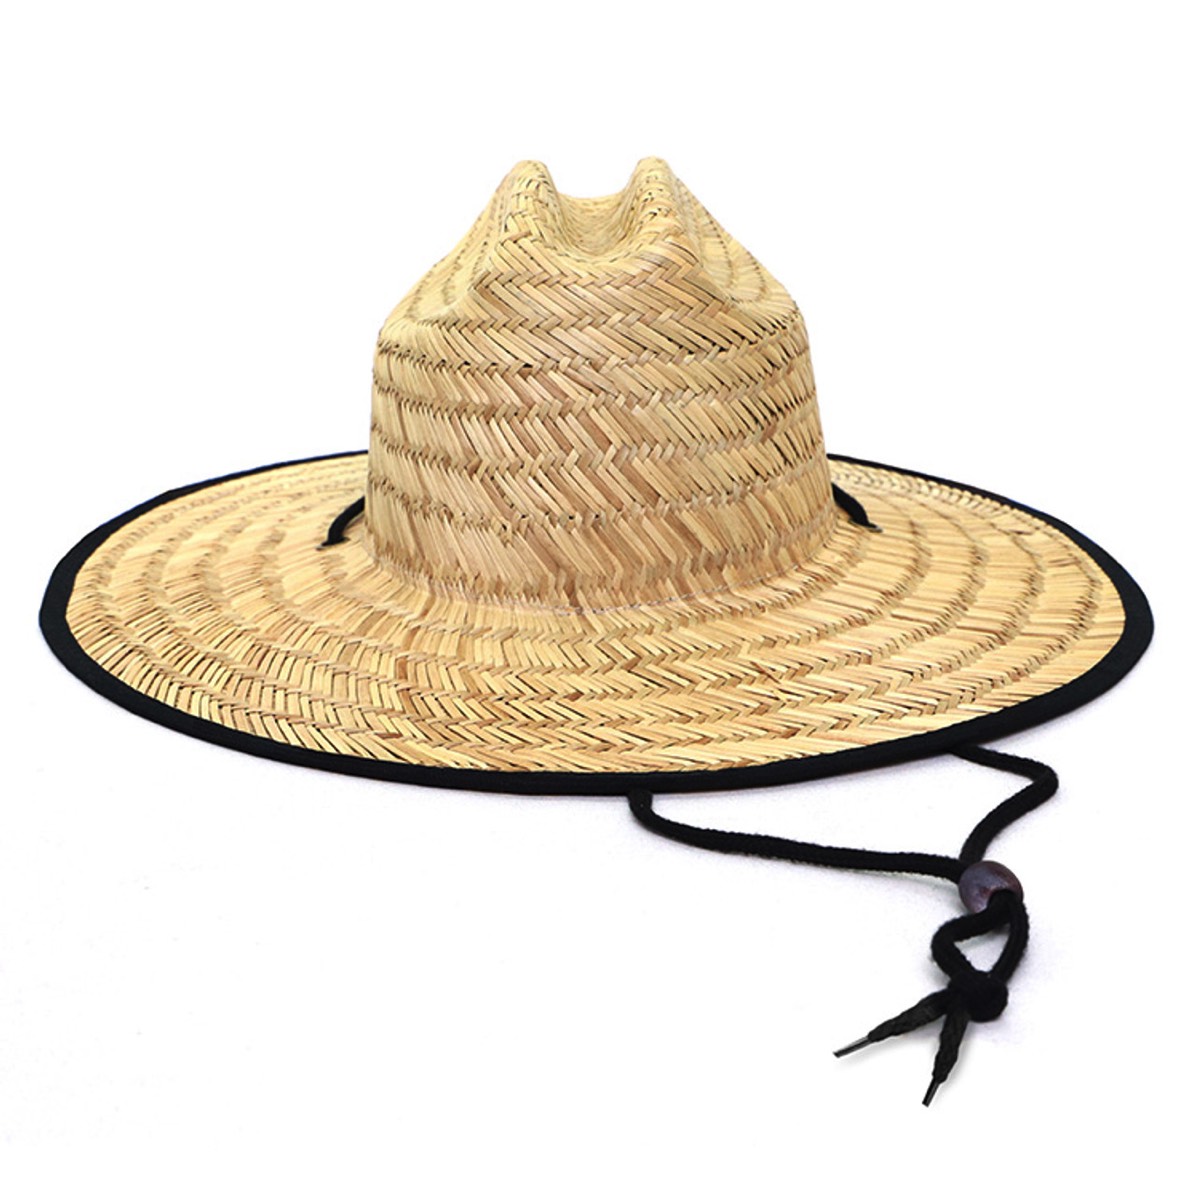 elevate straw hat styles available